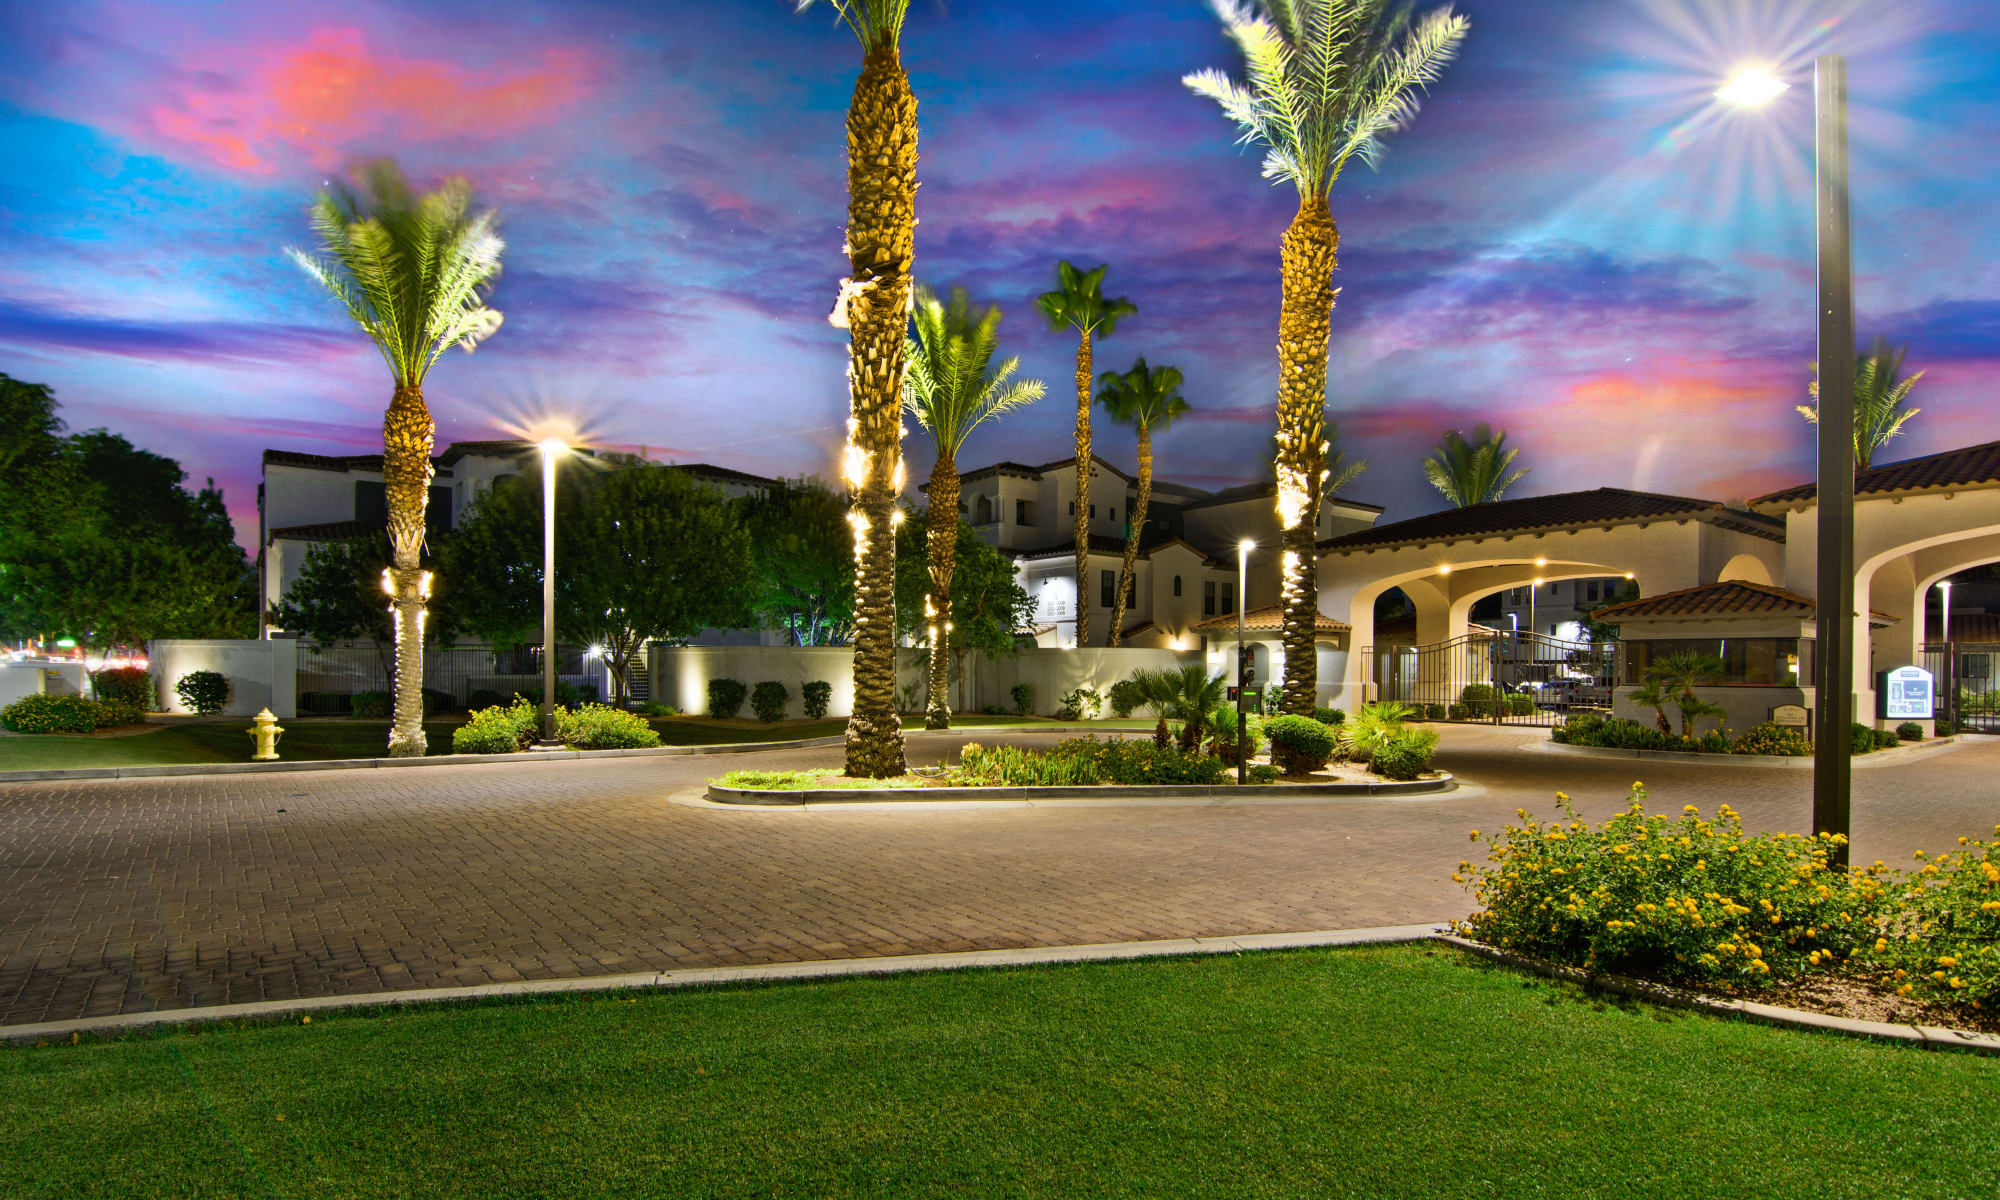 Photos of San Marquis featuring beautiful landscaping in Tempe, Arizona